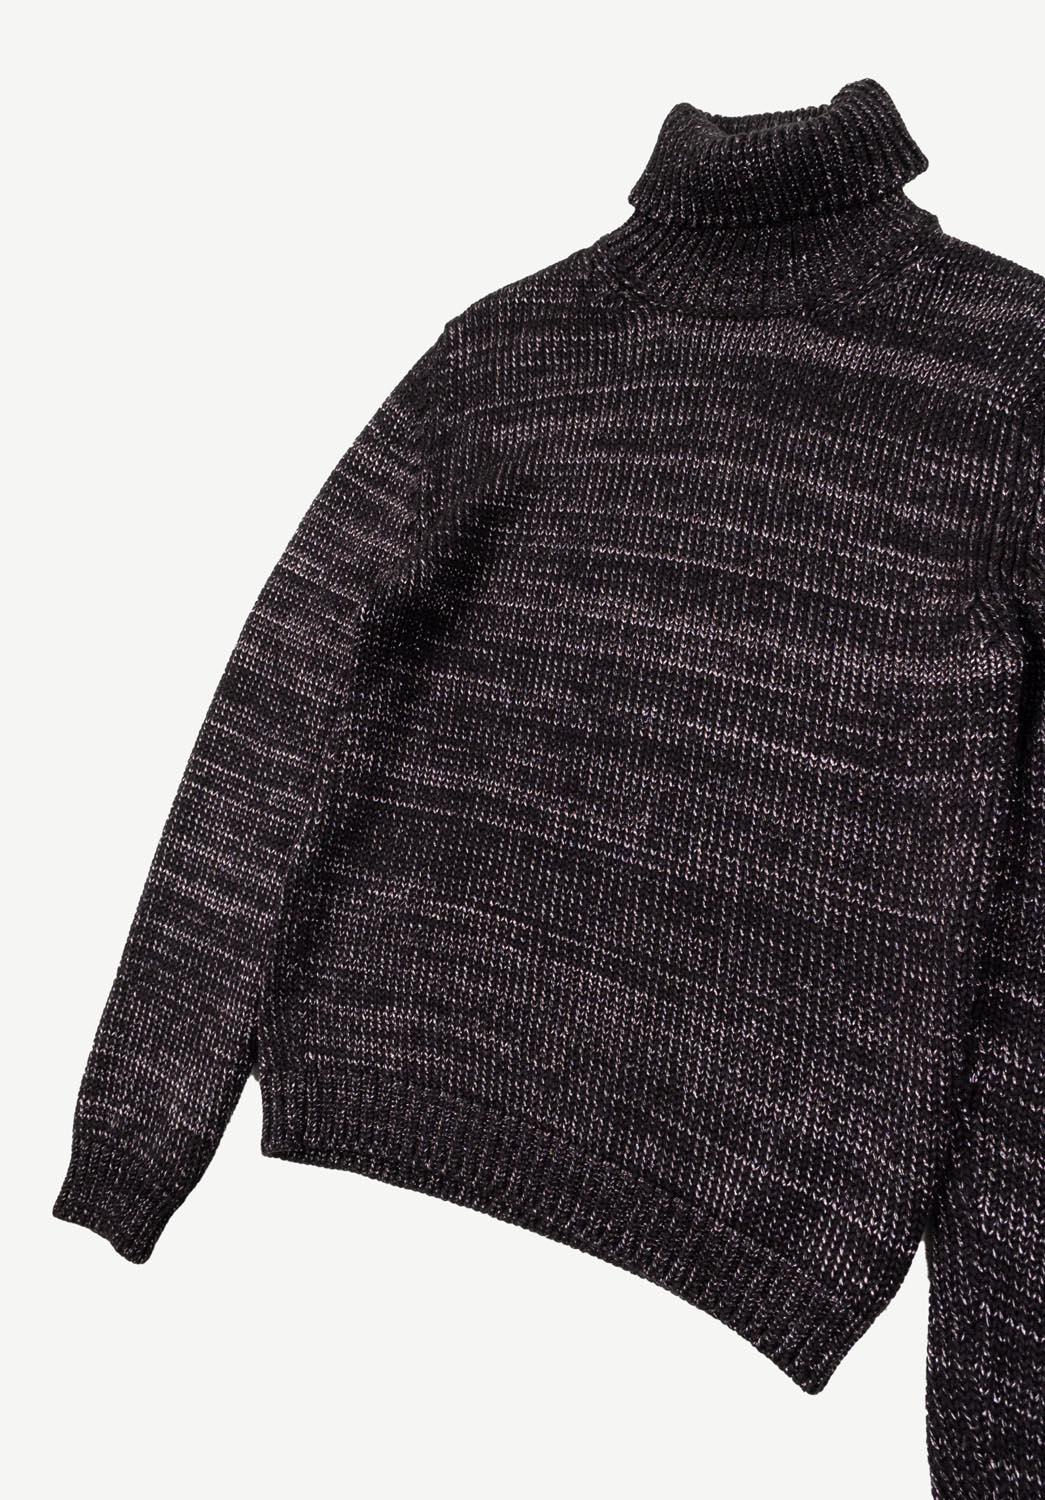 Item for sale is 100% genuine Jil Sander Turtleneck Knitted Men Sweater 
Color: Dark Grey/Shinny Metallic
(An actual color may a bit vary due to individual computer screen interpretation)
Material: 45% virgin wool, 45% acetate, 10% polyester
Tag